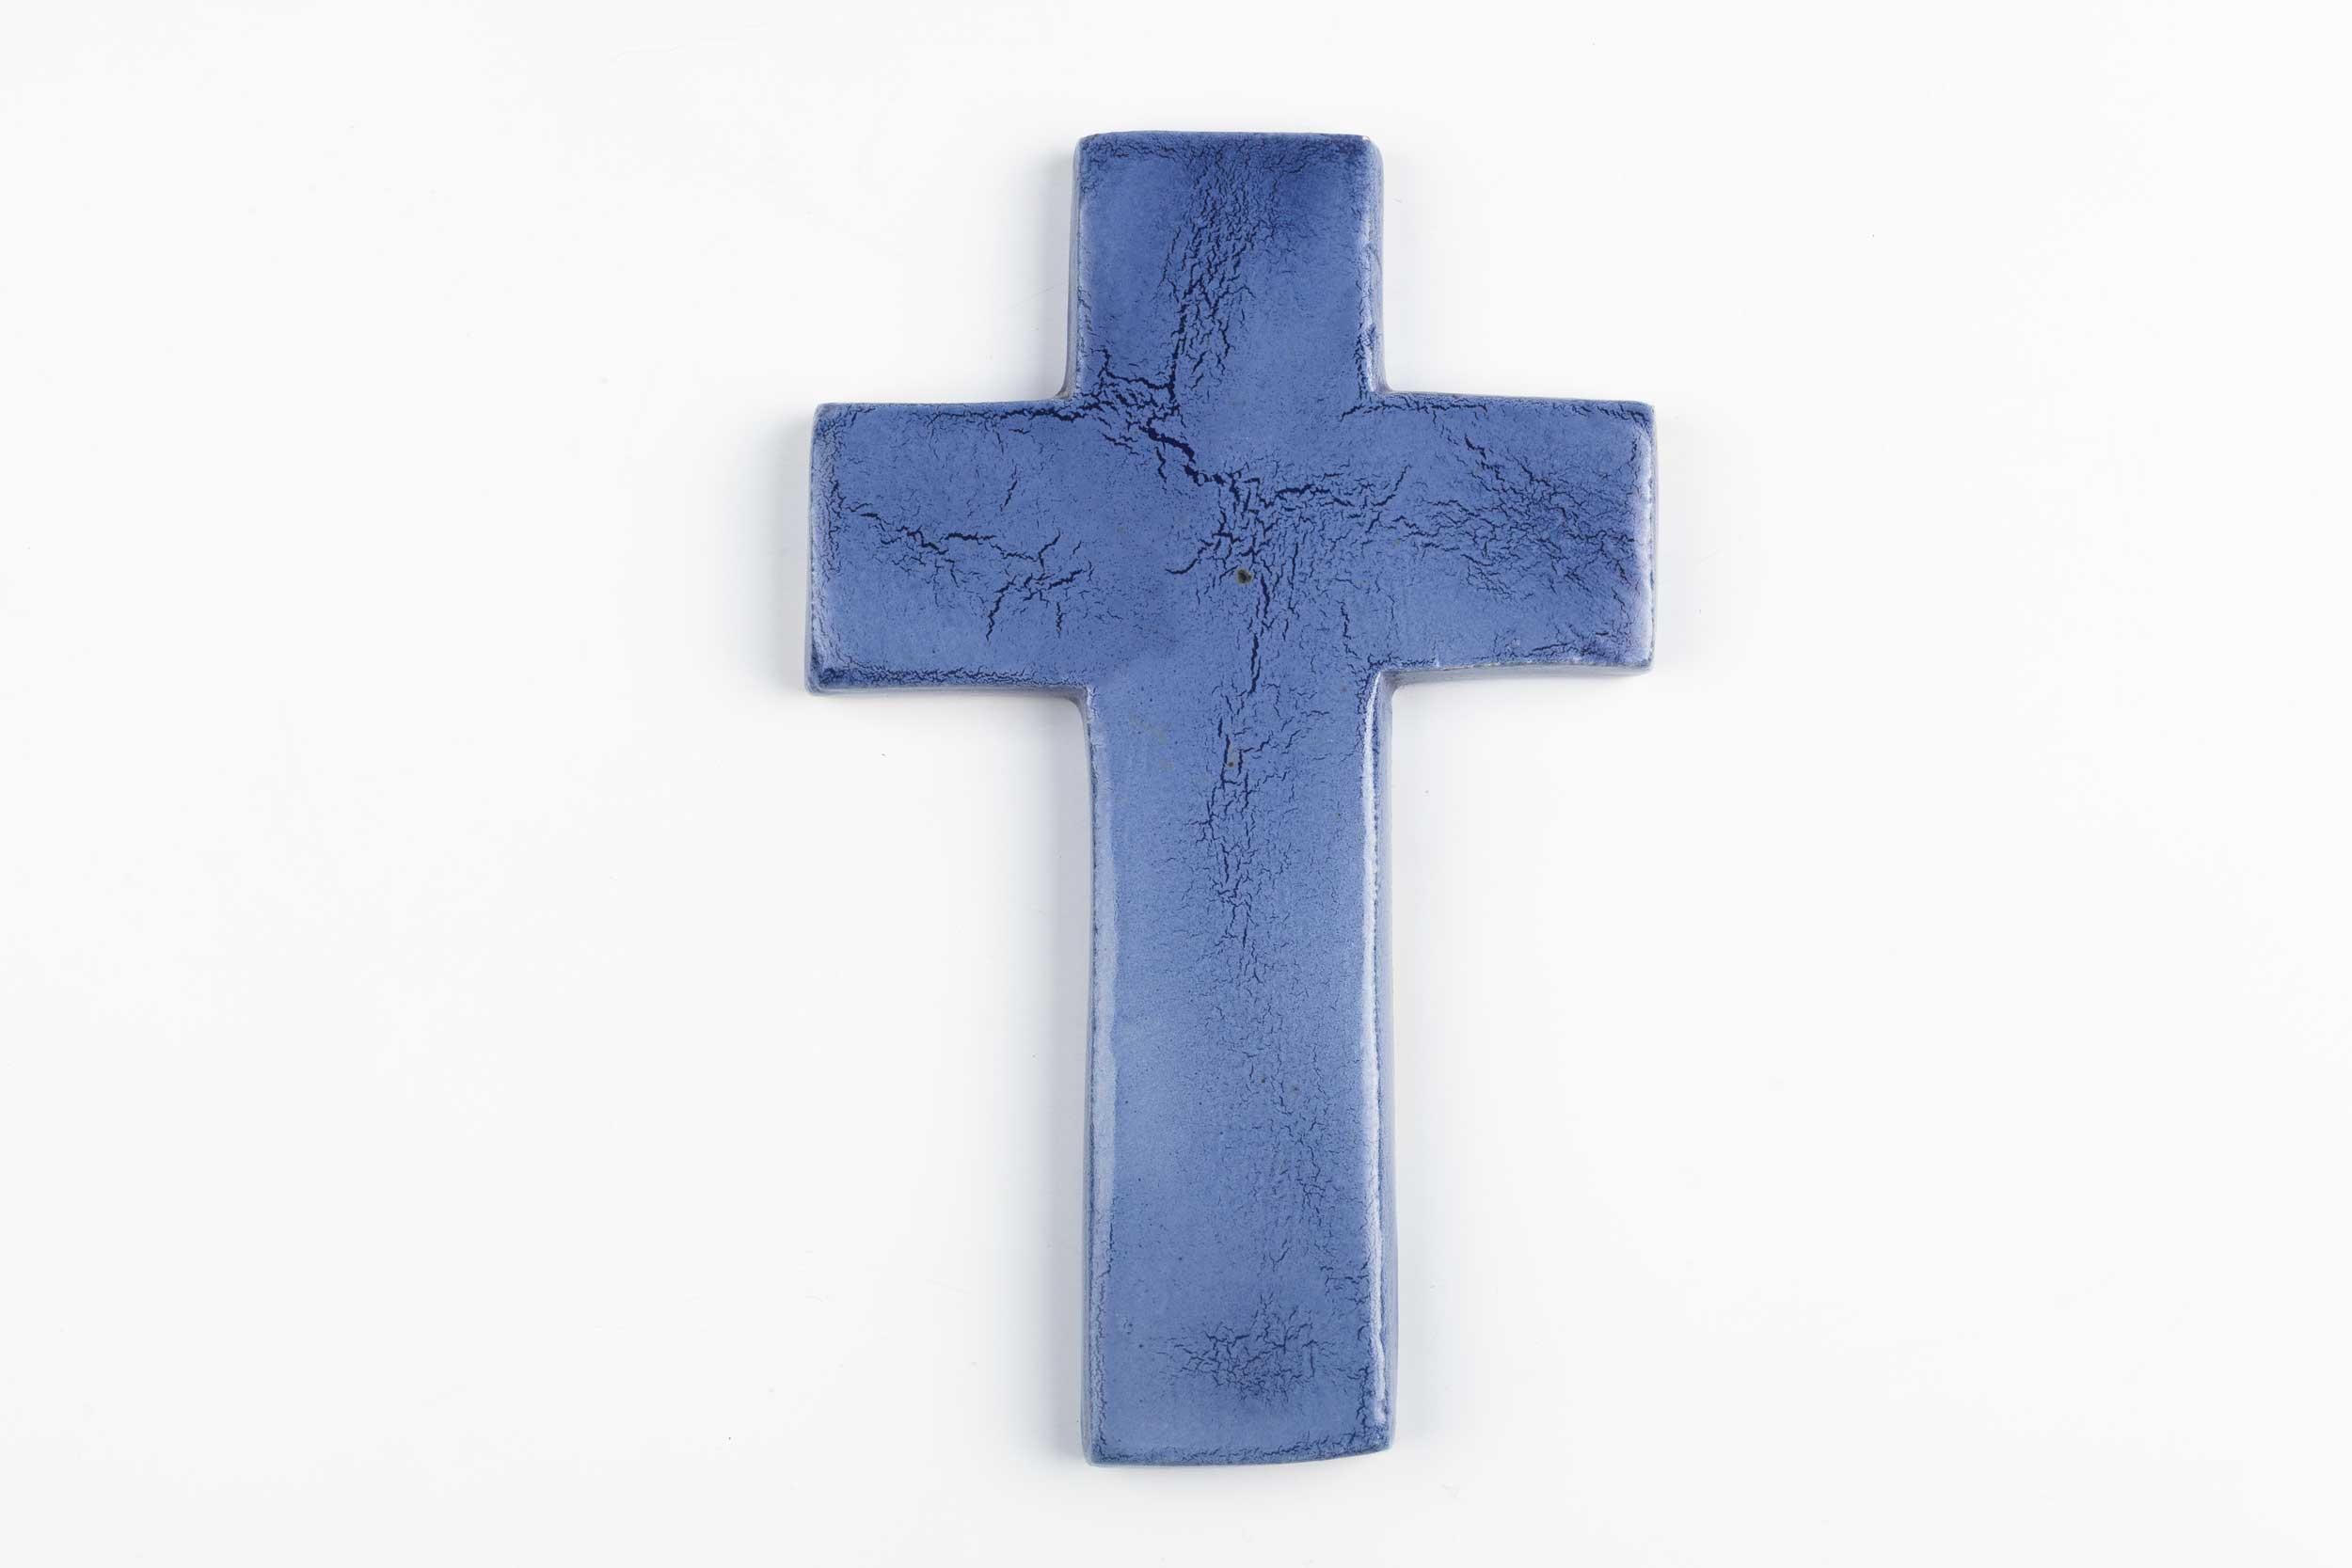 Wall crucifix indigo blue-violet color with semi-gloss crackle glaze. This piece is part of a large collection of unique ceramic crosses, all made in Belgium between the 1950s and late 1980s. From modernism to brutalism, they range from being as